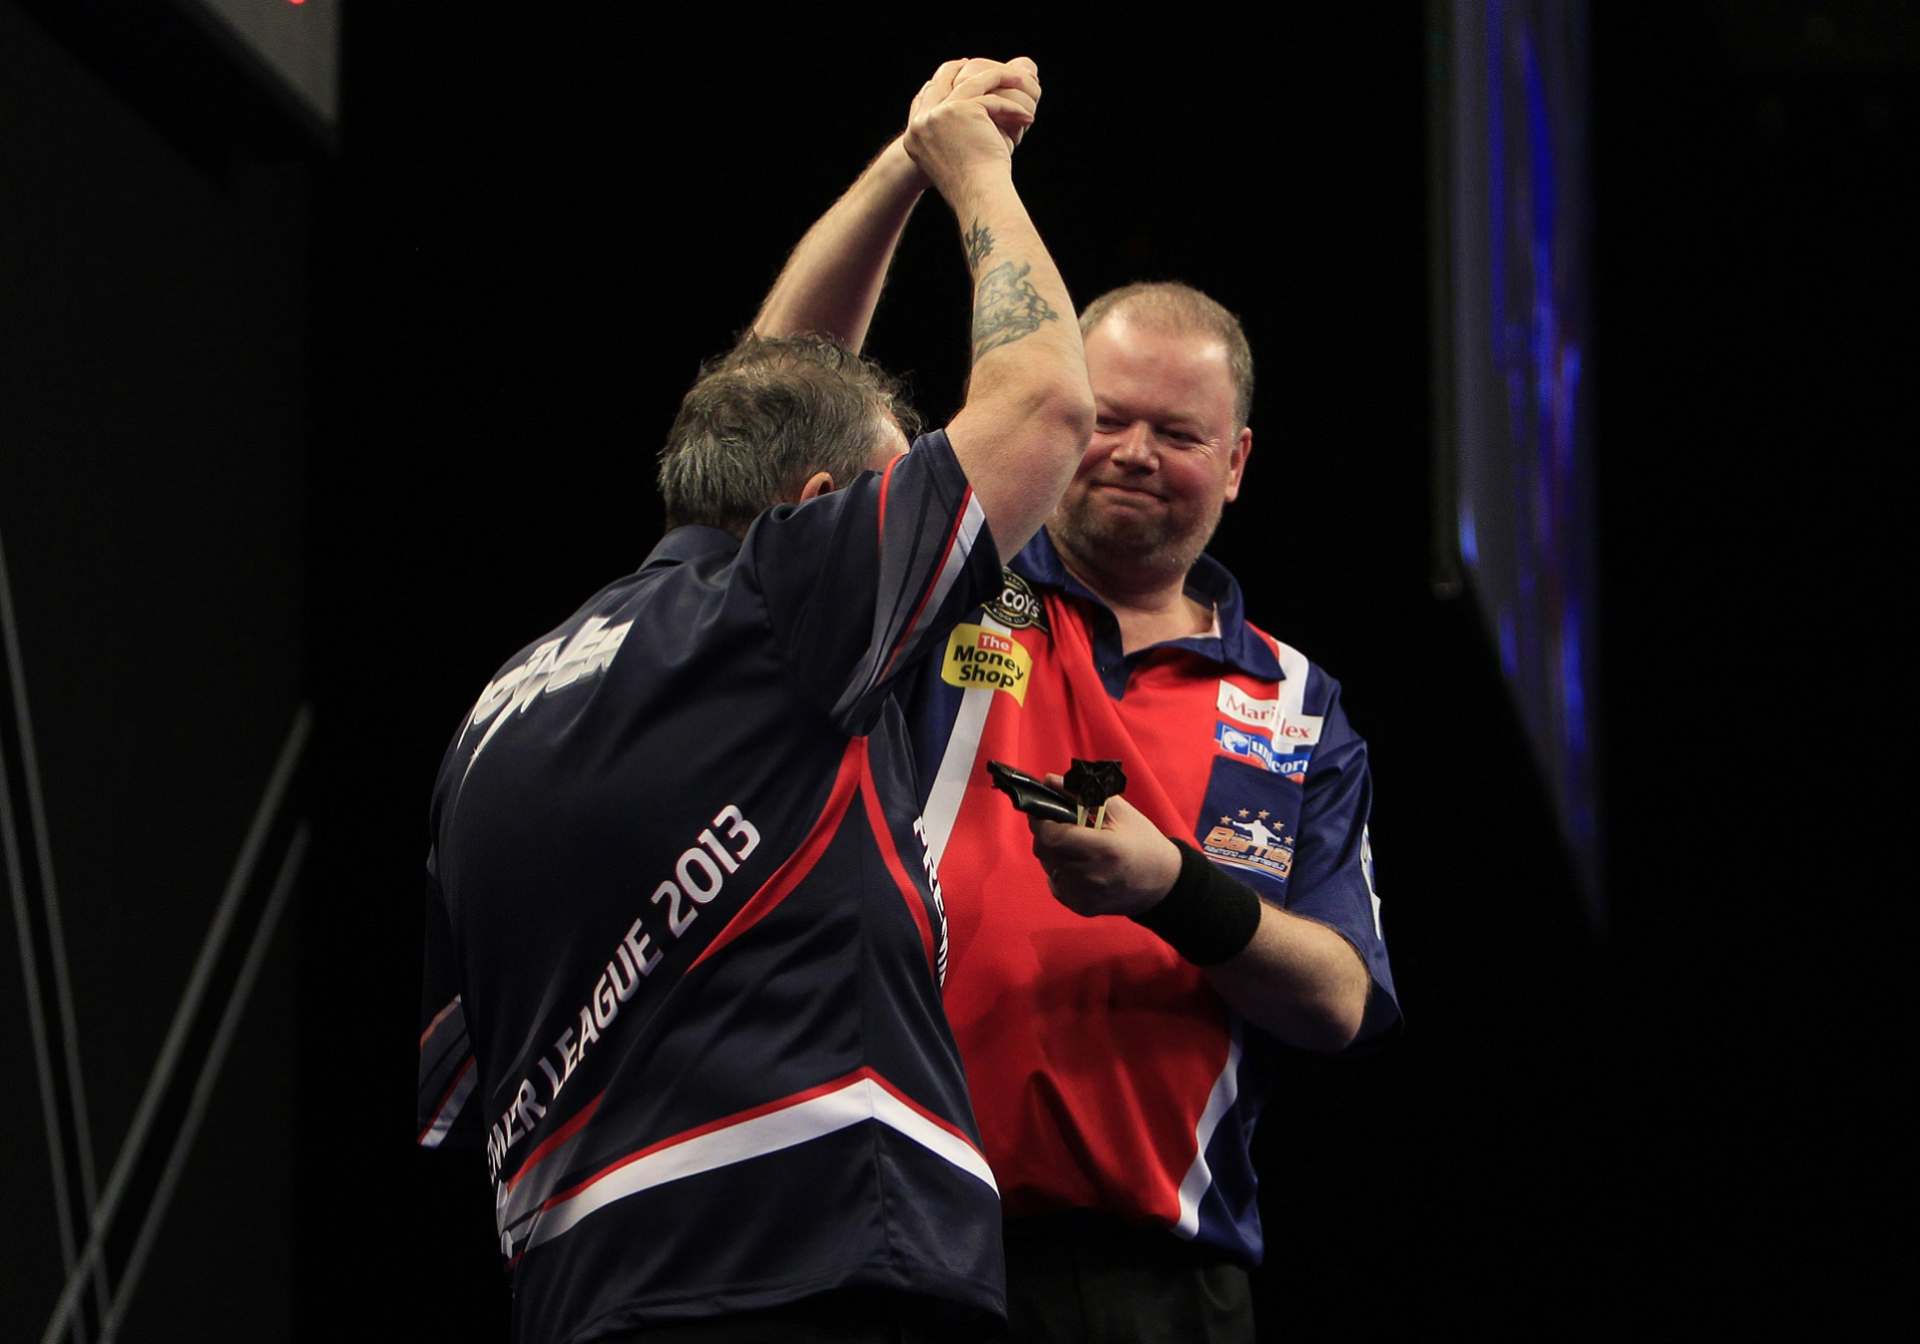 2013 - Barney is defeated by great rival Phil Taylor in the semi-finals